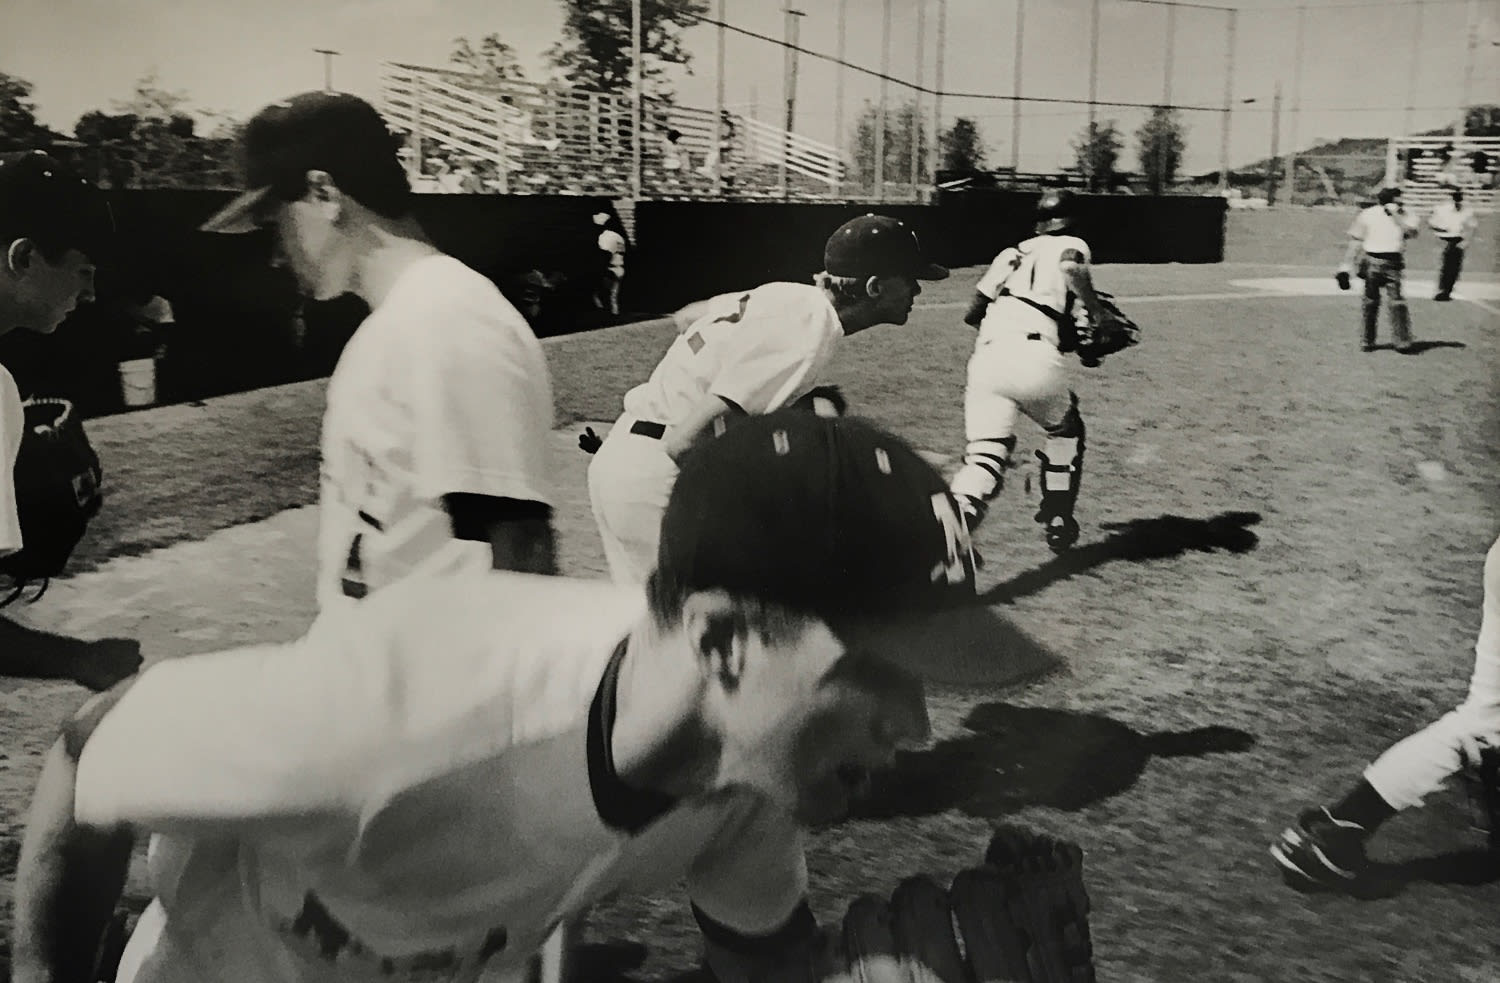 RUSSELL MONK, College Baseball, Tennesee, 1992